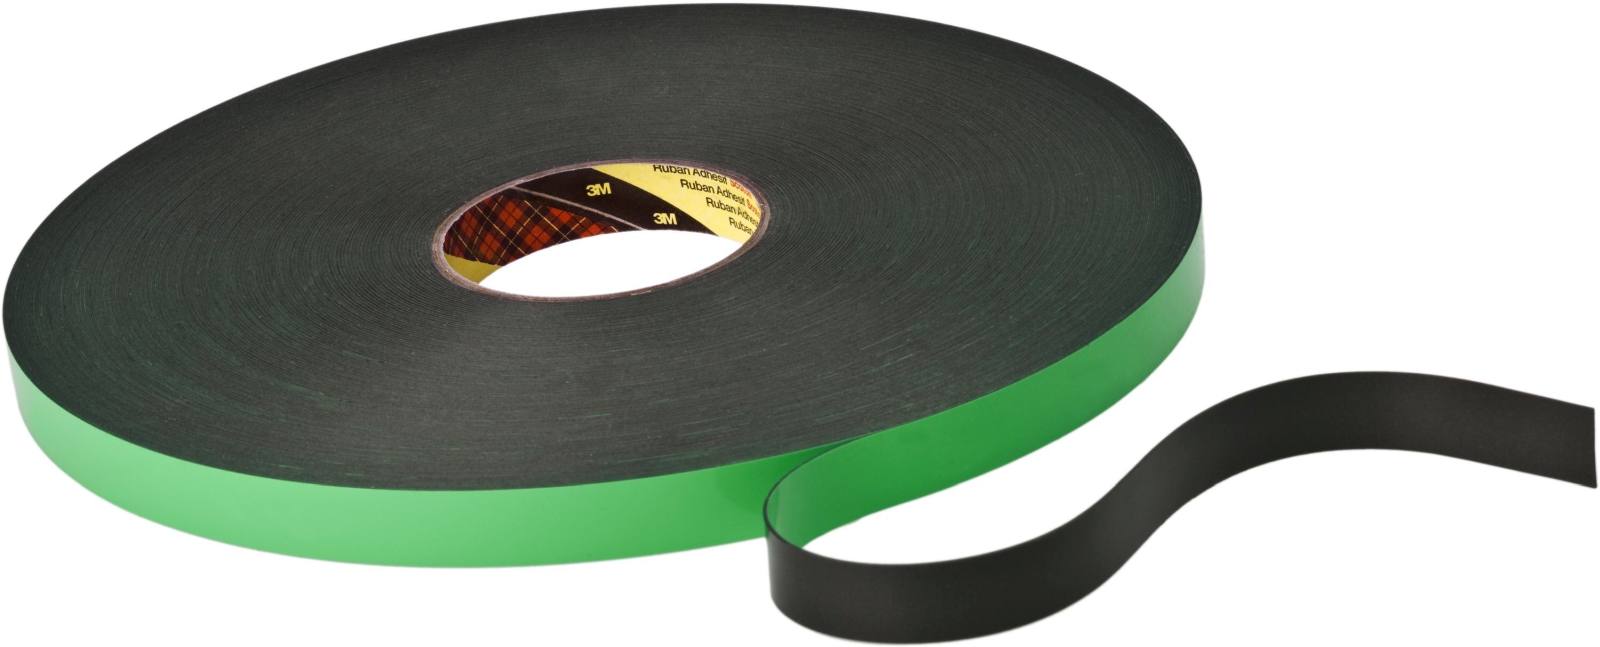 3M Double-sided PE foam tape with acrylic adhesive 9515B, black, 12 mm x 33 m, 1.5 mm